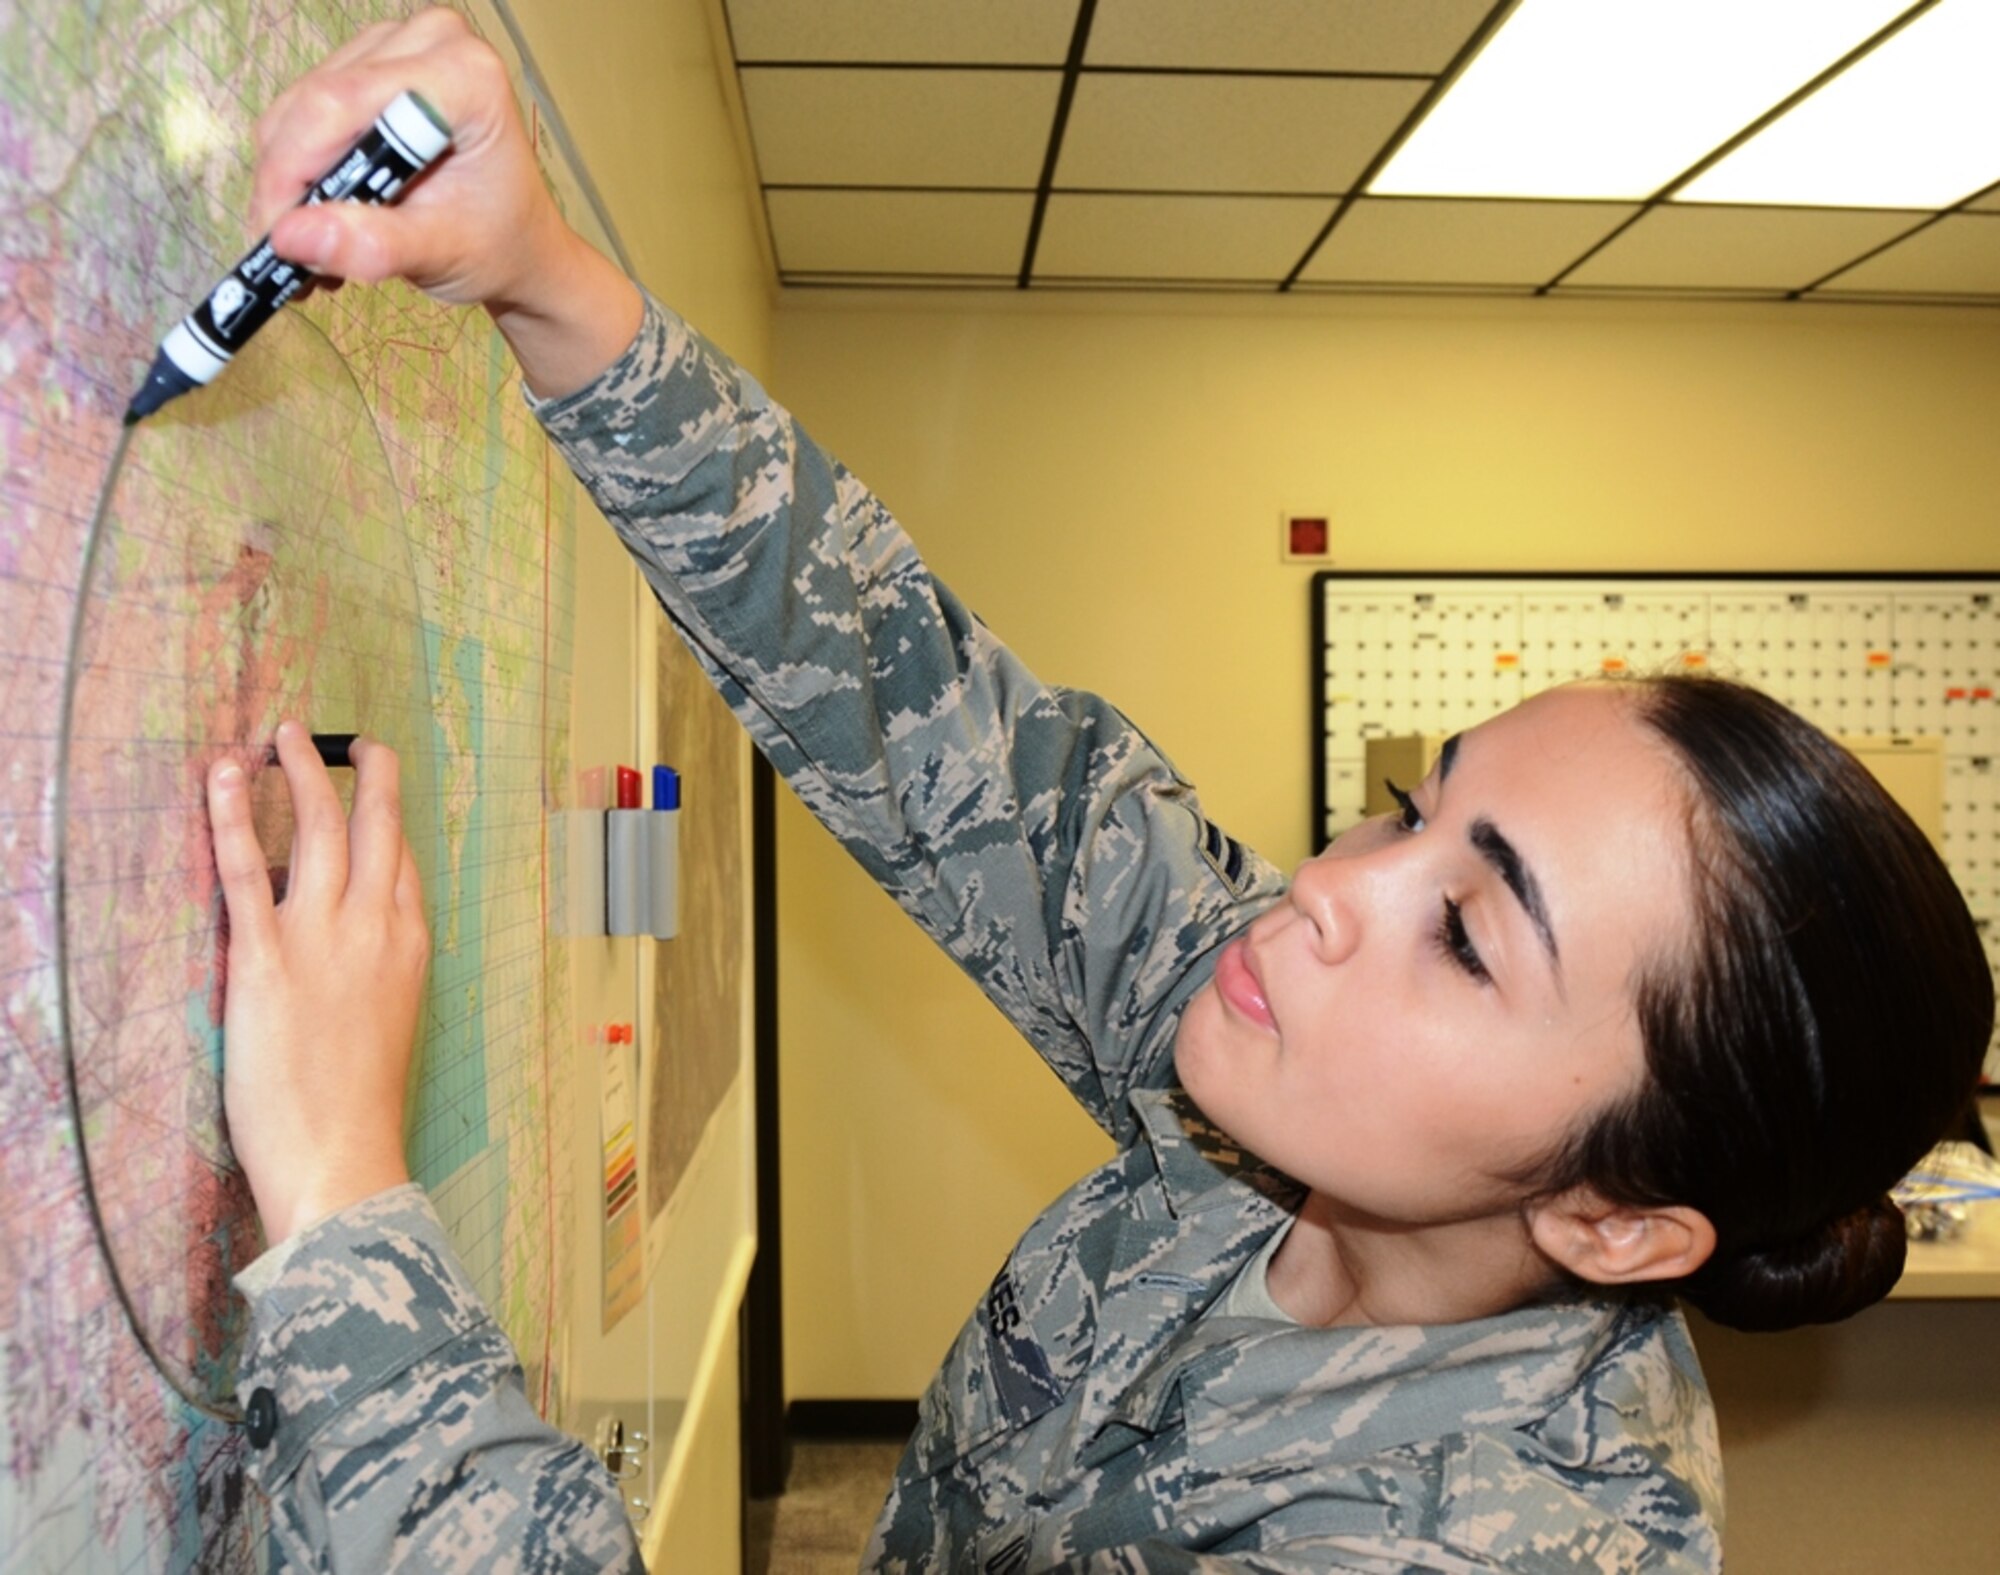 Airman 1st Class Andrea Chaves is the Maryland Air National Guard December Airman Spotlight. Chaves works in the Emergency Management shop as part of the 175th Civil Engineering Squadron. (U.S. Air National Guard photo by Tech. Sgt. David Speicher/RELEASED)